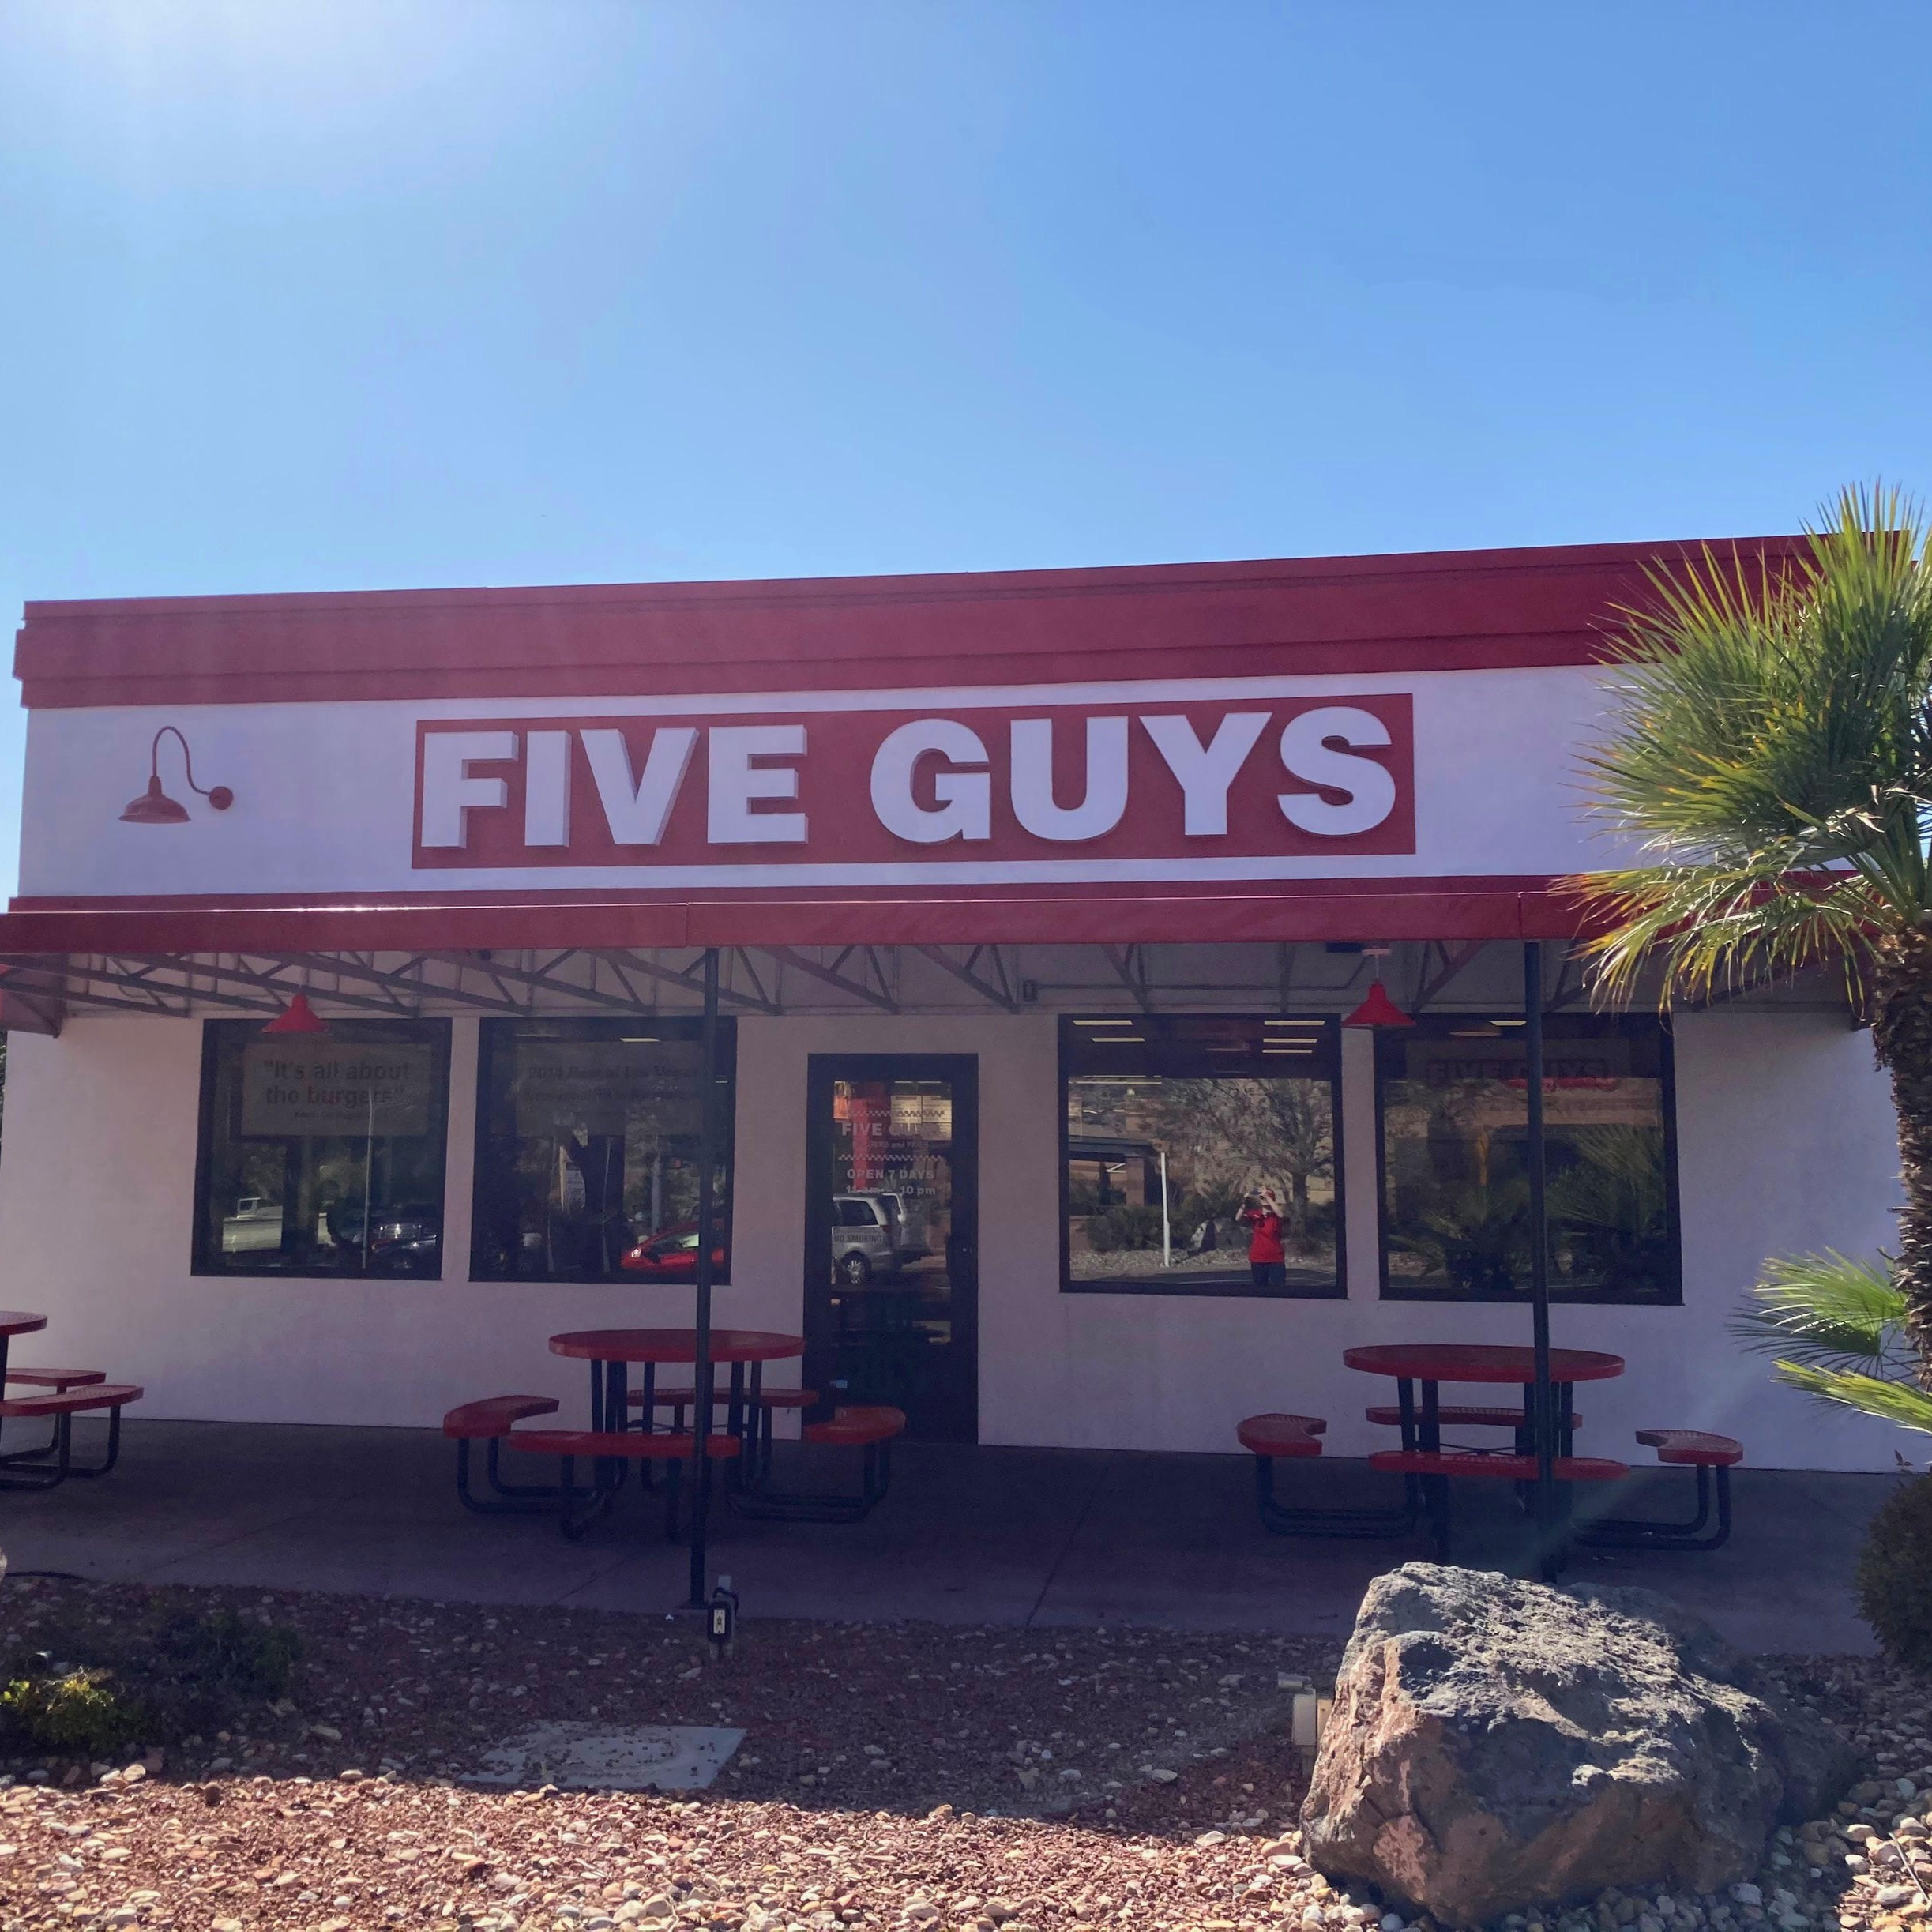 Five Guys at 1279 East 100 South in St. George, UT.